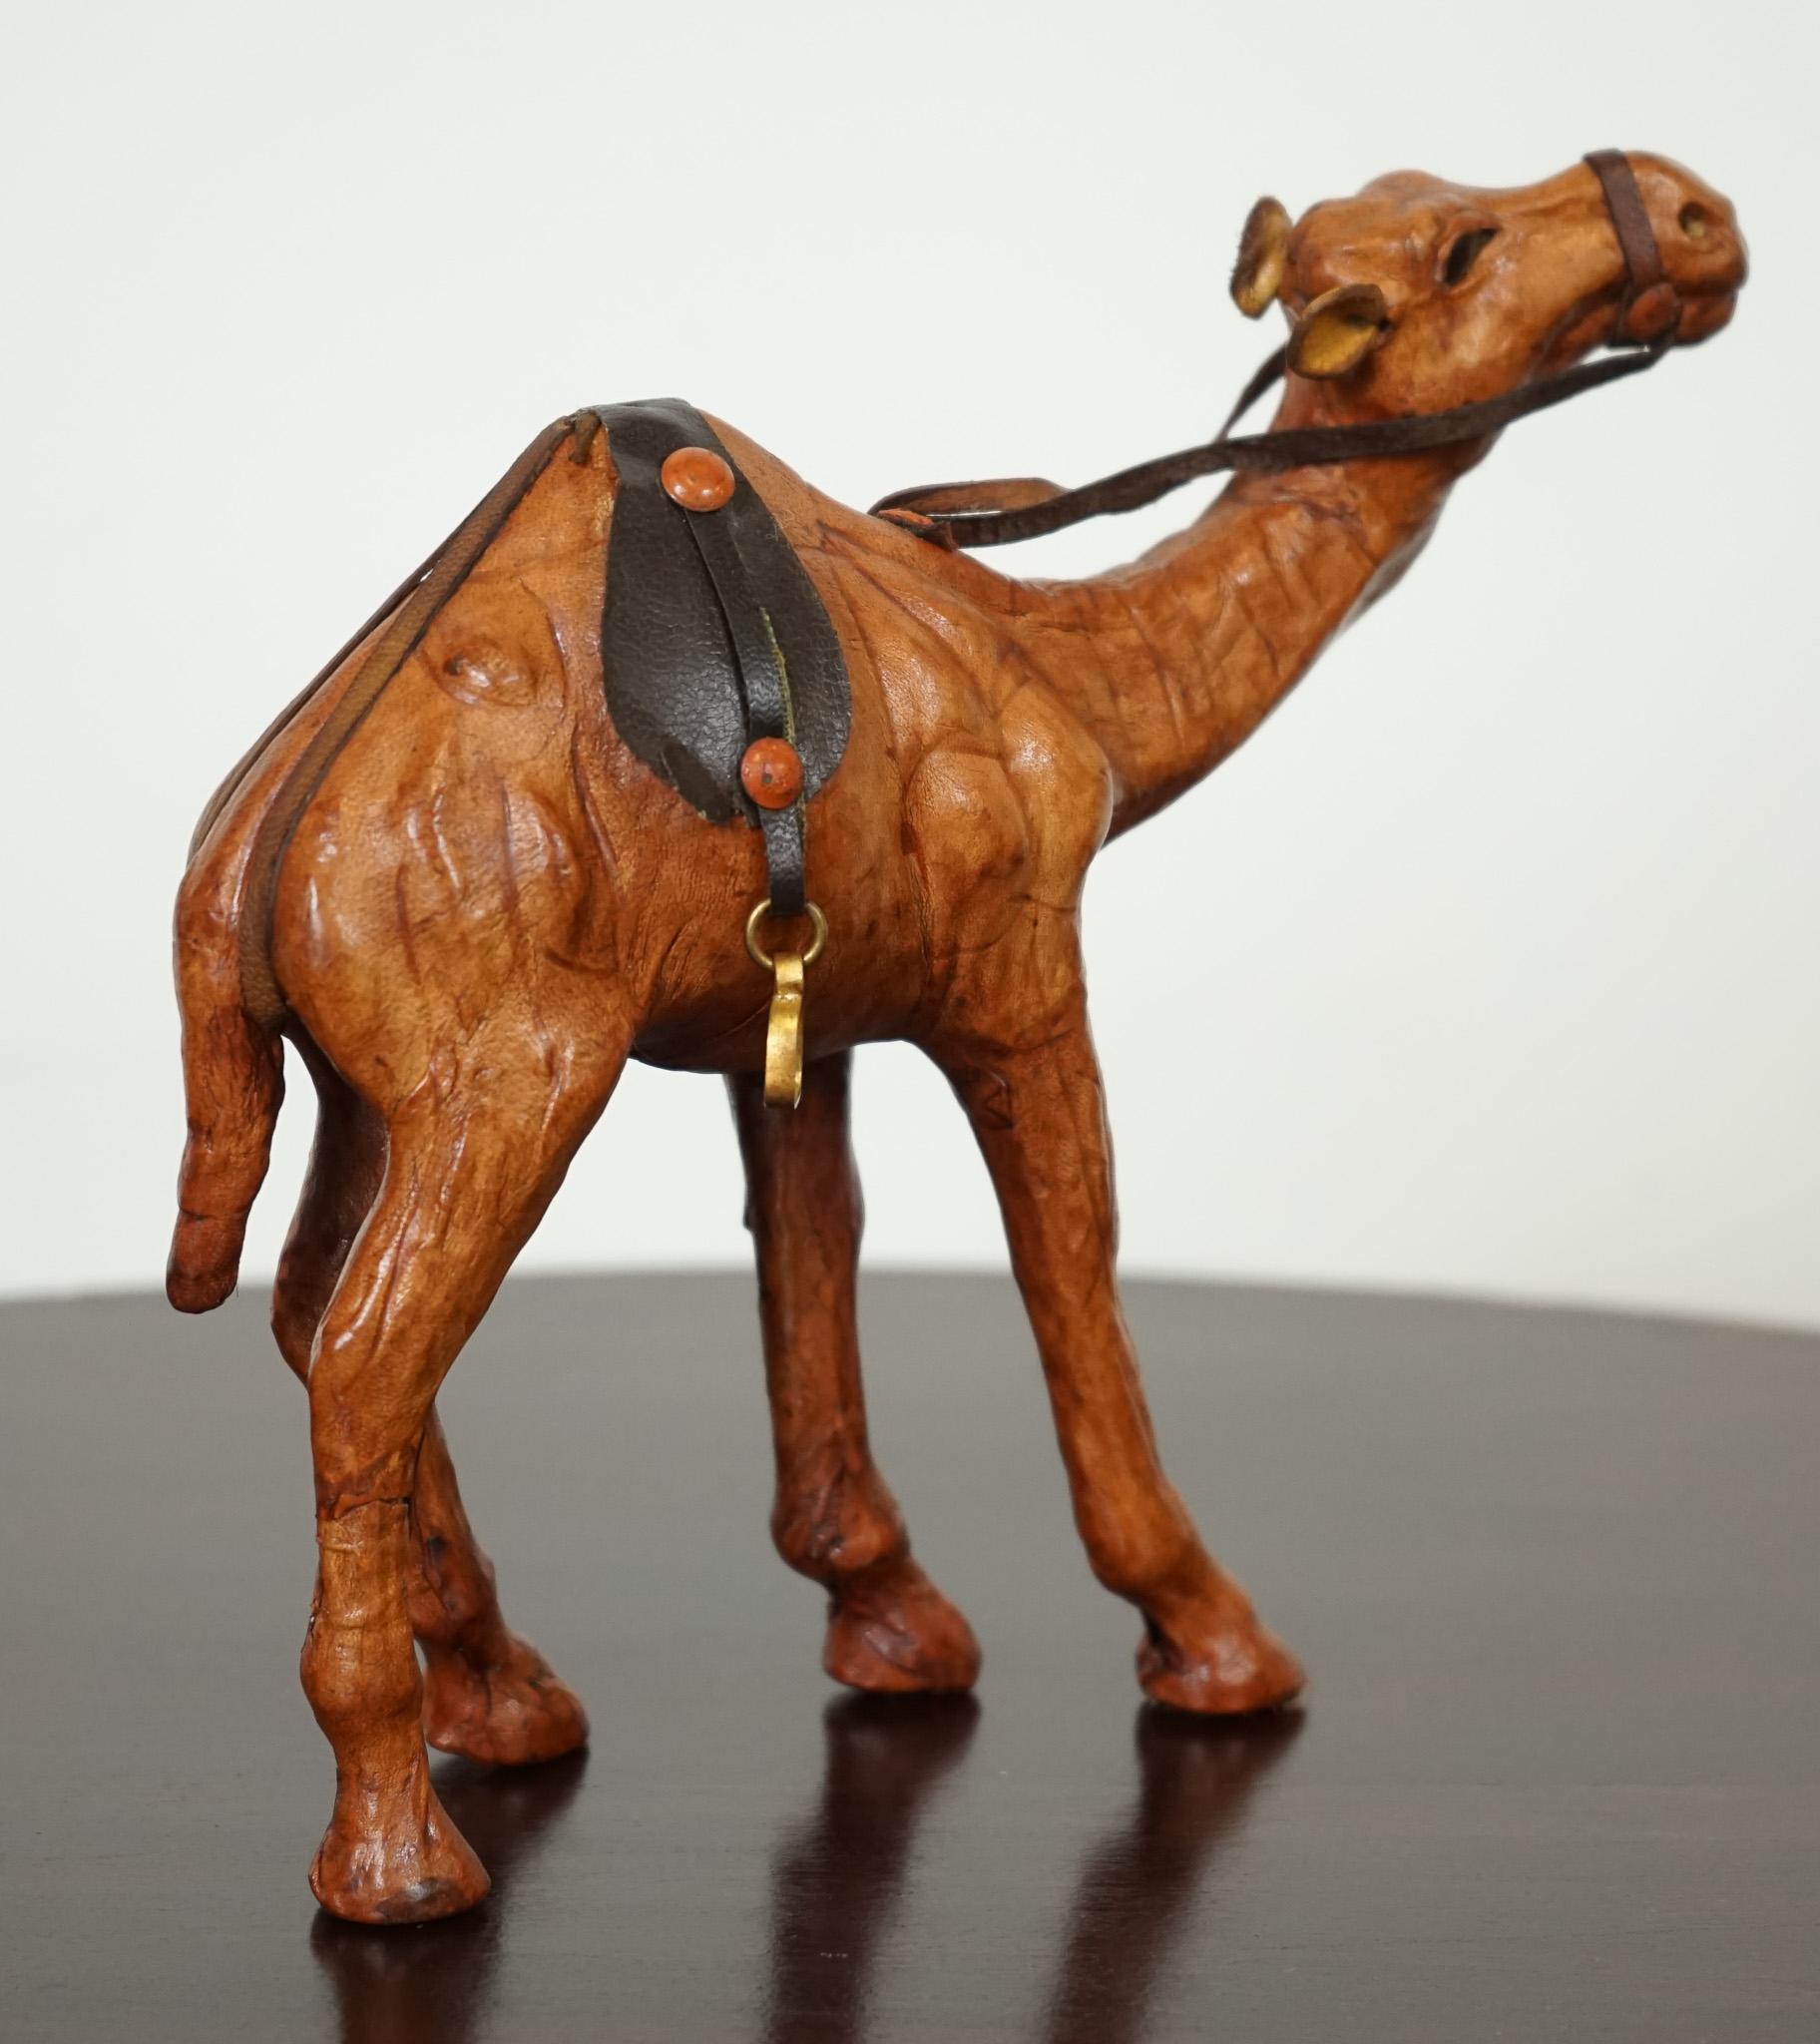 Hand-Crafted LIBERTY'S LONDON CAMEL SCULPTURE WiTH LOVELY AGED LEATHER ON HAND CARVED WOOD  For Sale